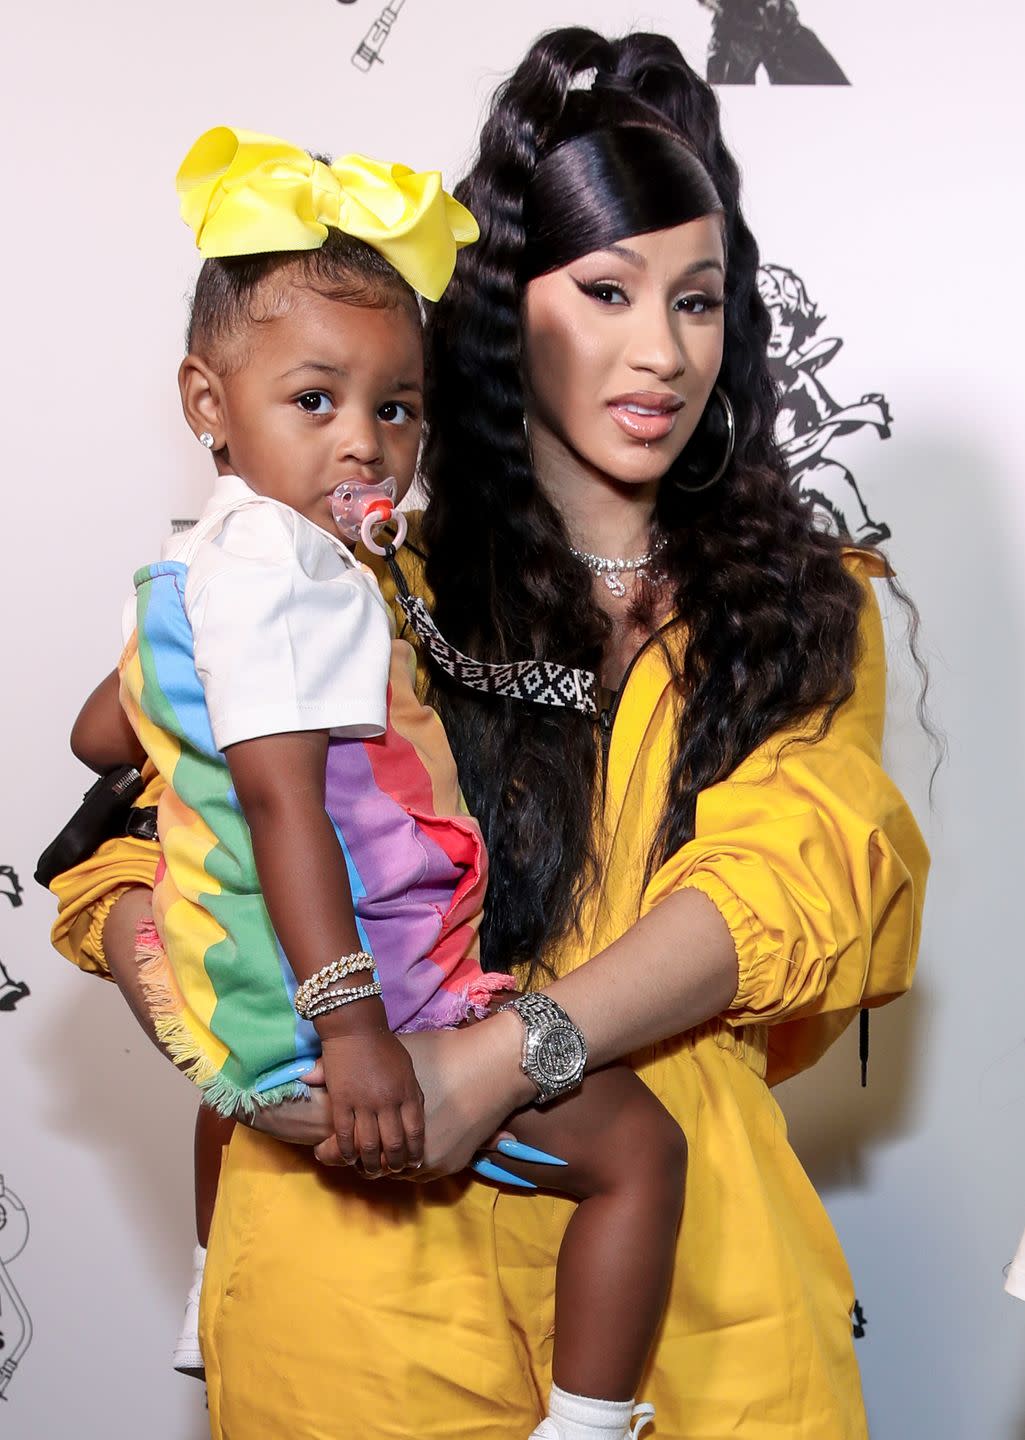 Cardi B Defends Offset Giving a Birkin Bag to Kulture for Her Second Birthday